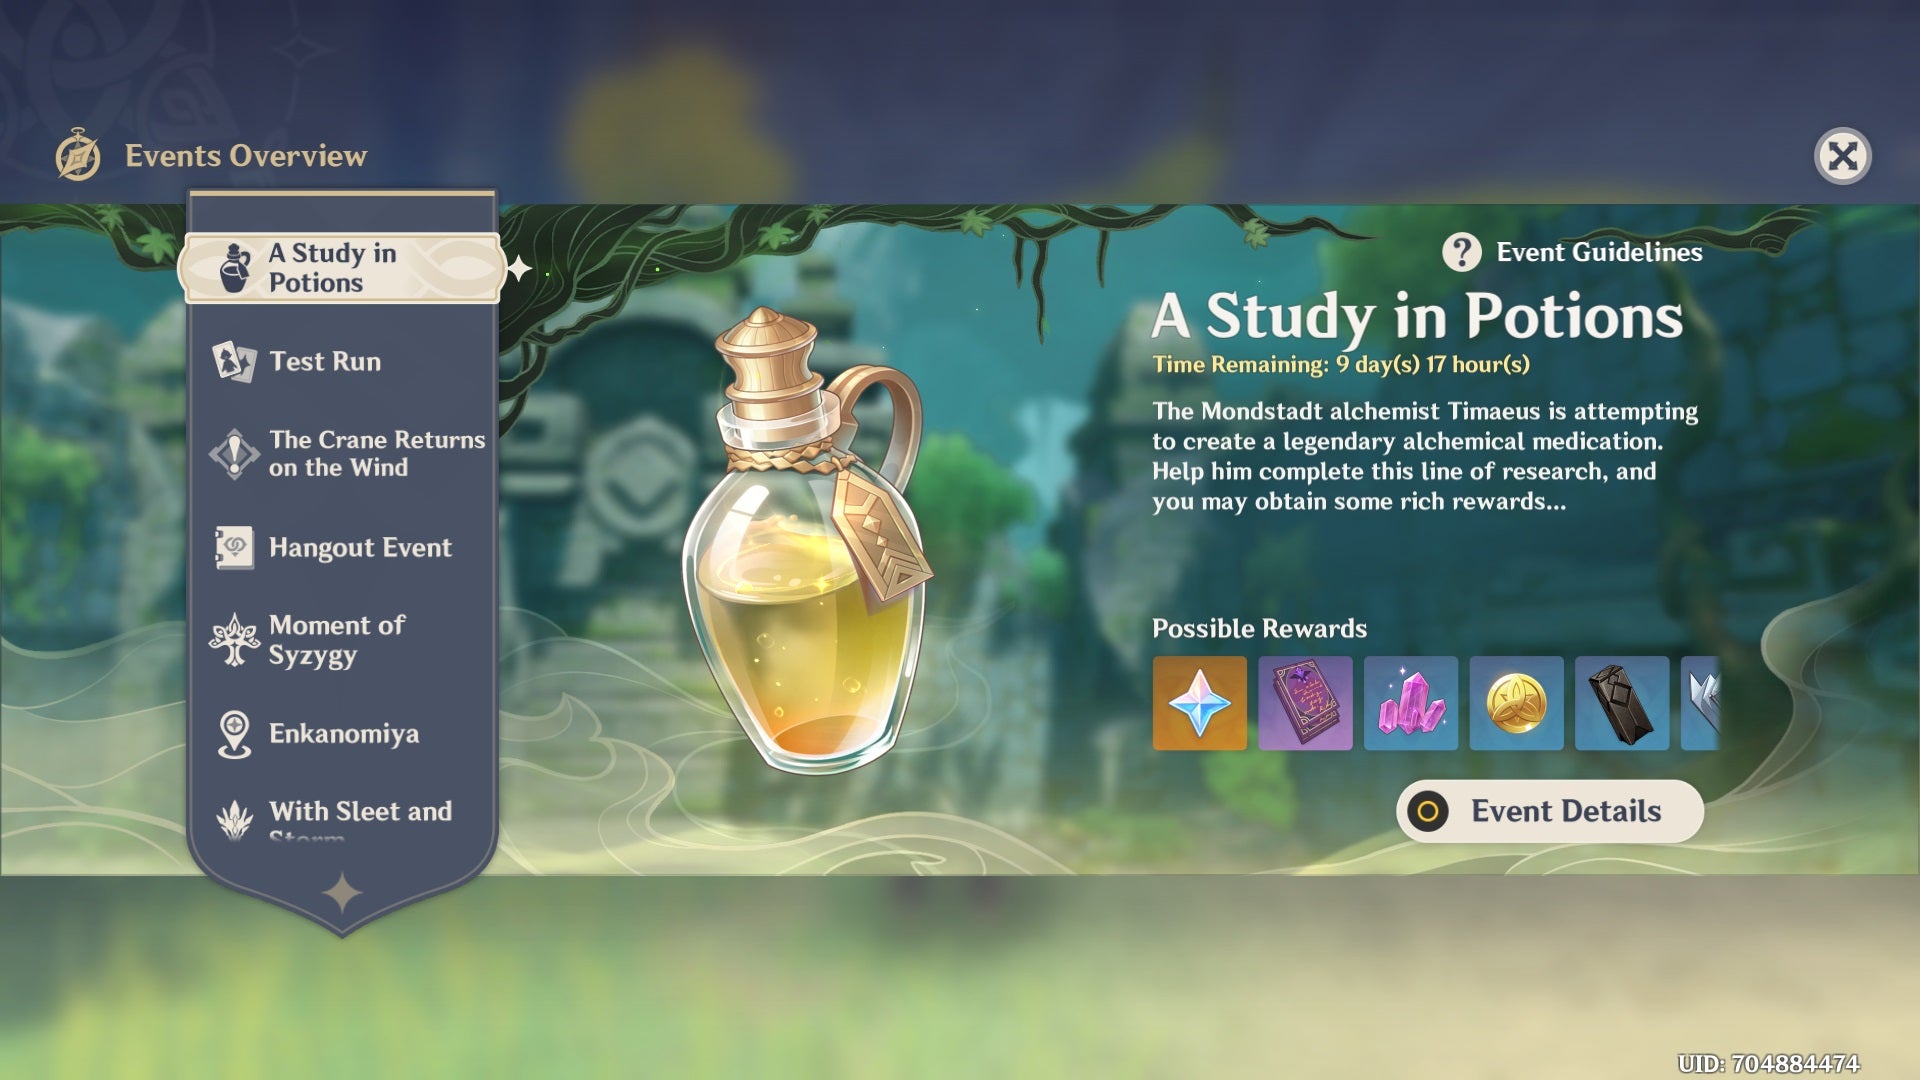 Image for Genshin Impact: A Study in Potions event has gone live!